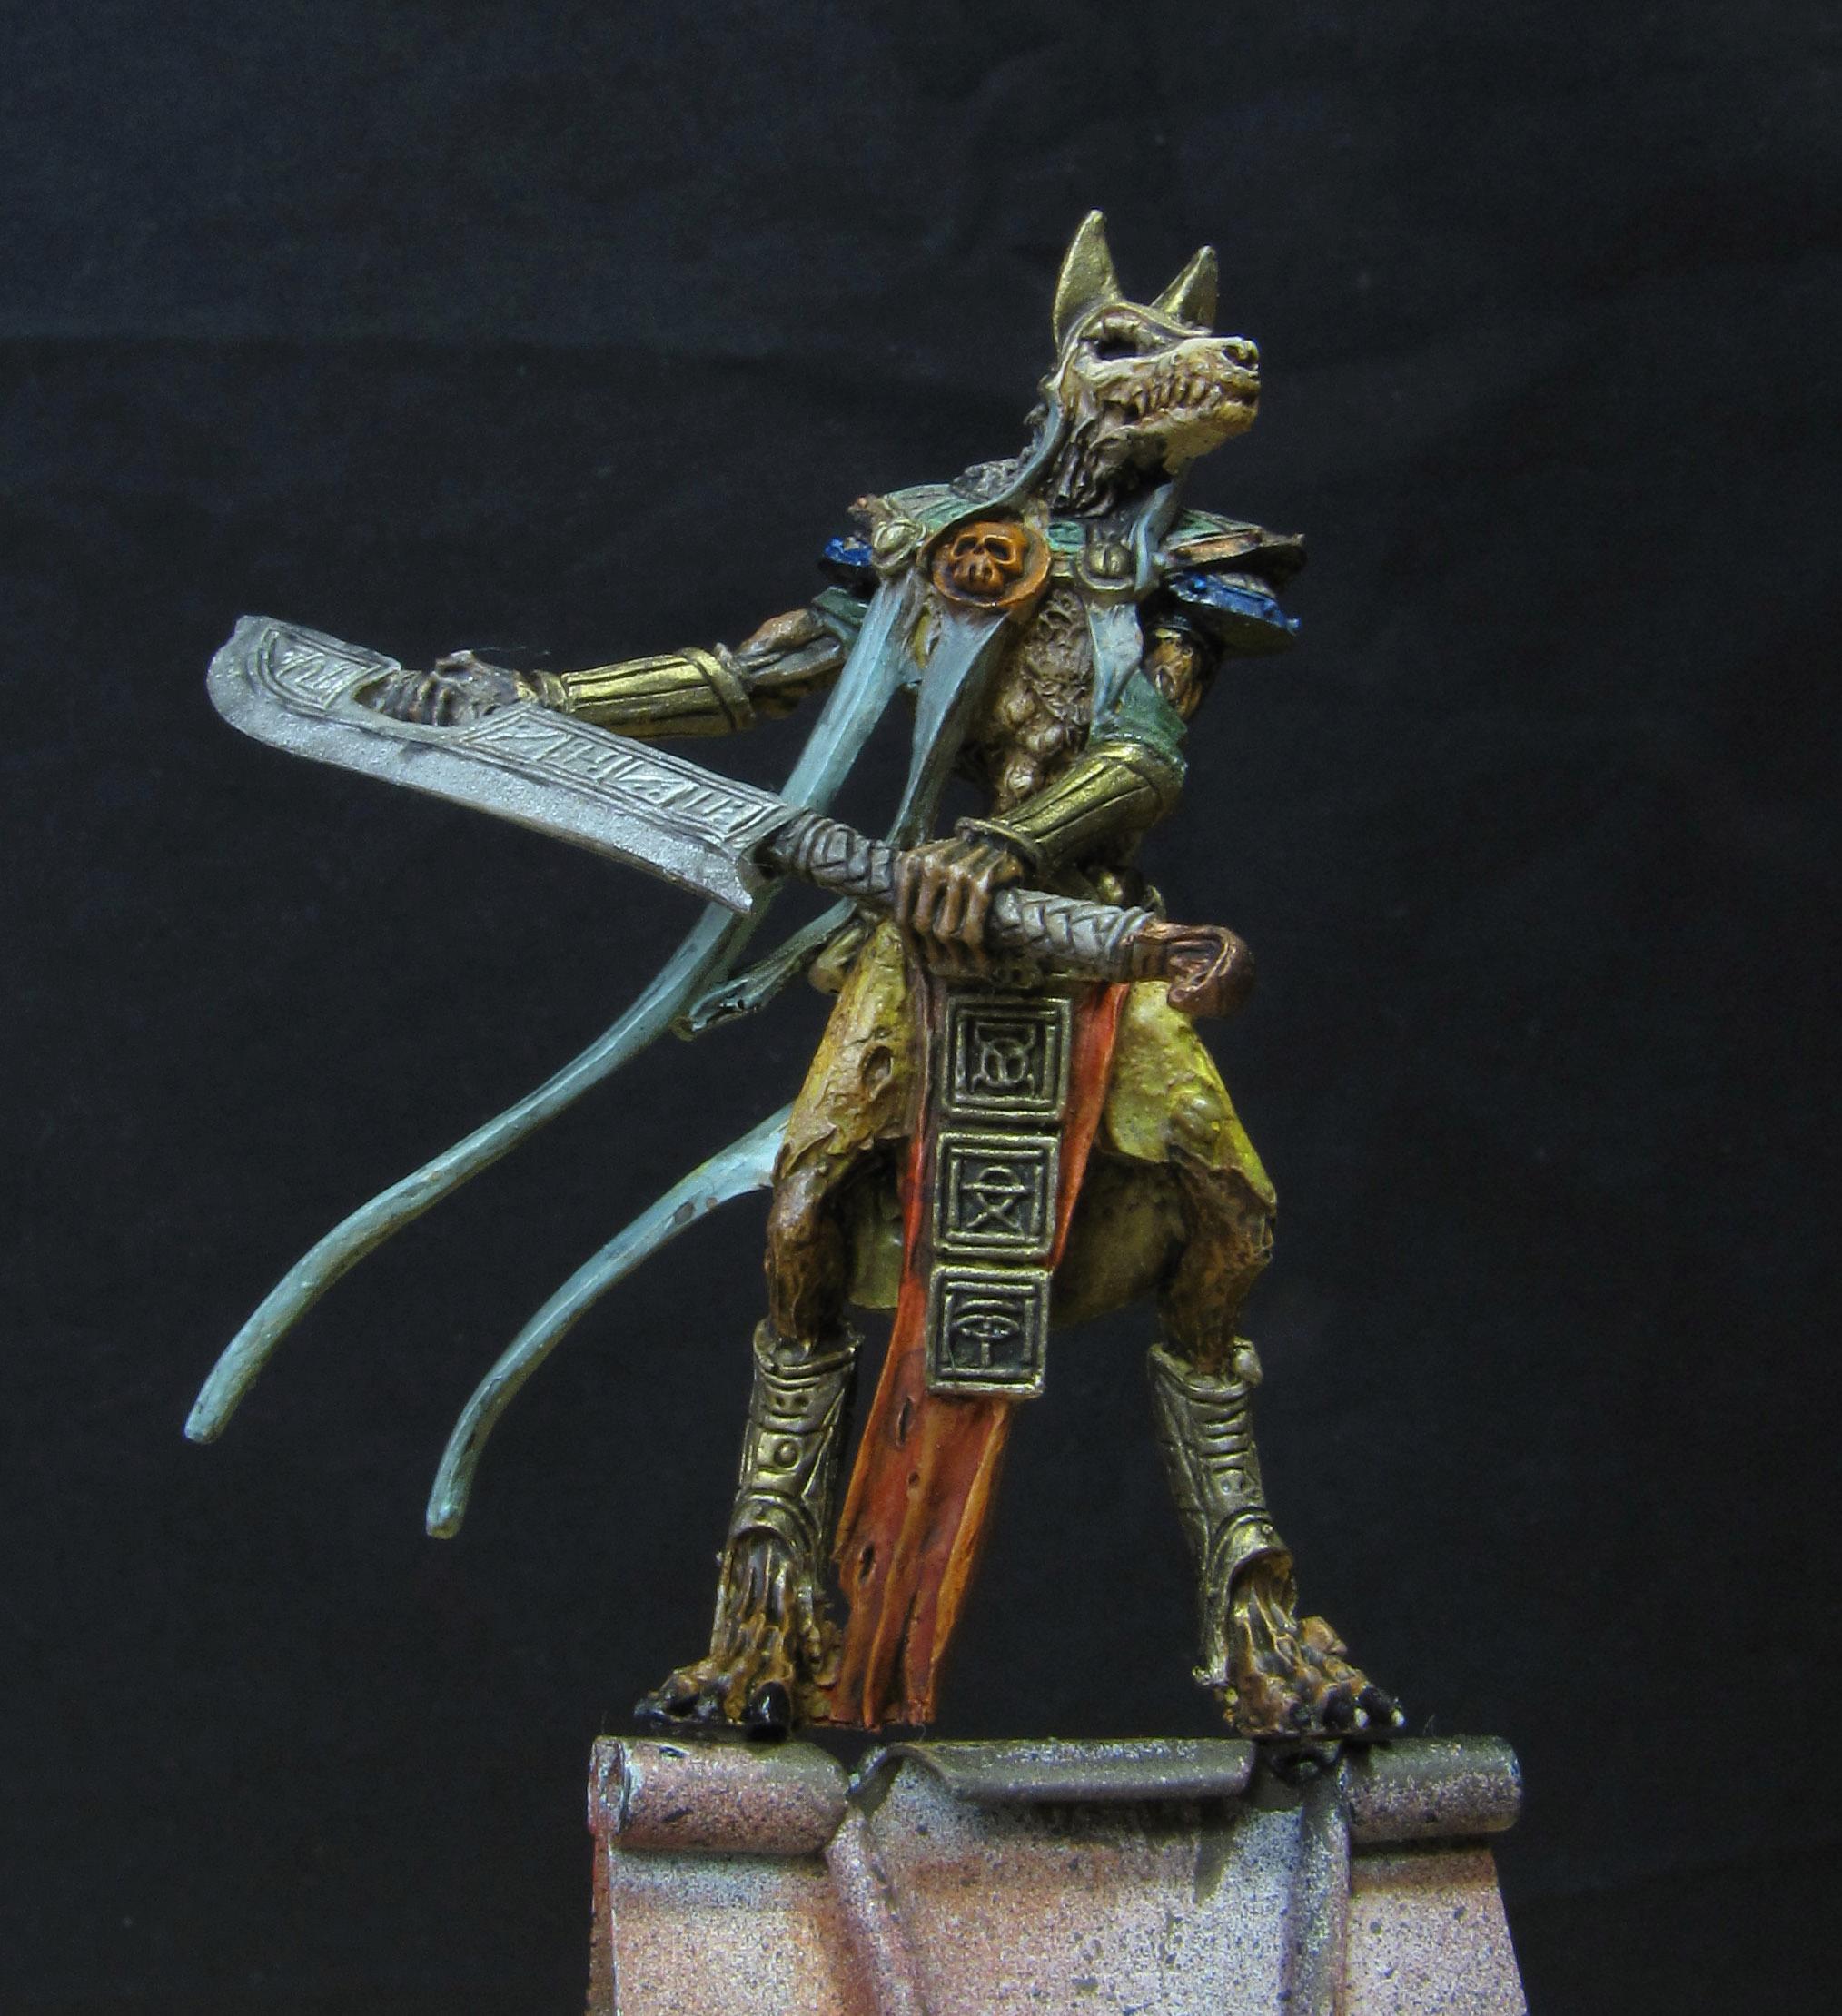 Egyptian, Finecast, Great, Kings, Tomb, Tomb Kings, Tomb Kings Ubshati Finecast Resin, Ubshati Finecast Resin, Ushabti, Warhammer Fantasy, Weapon